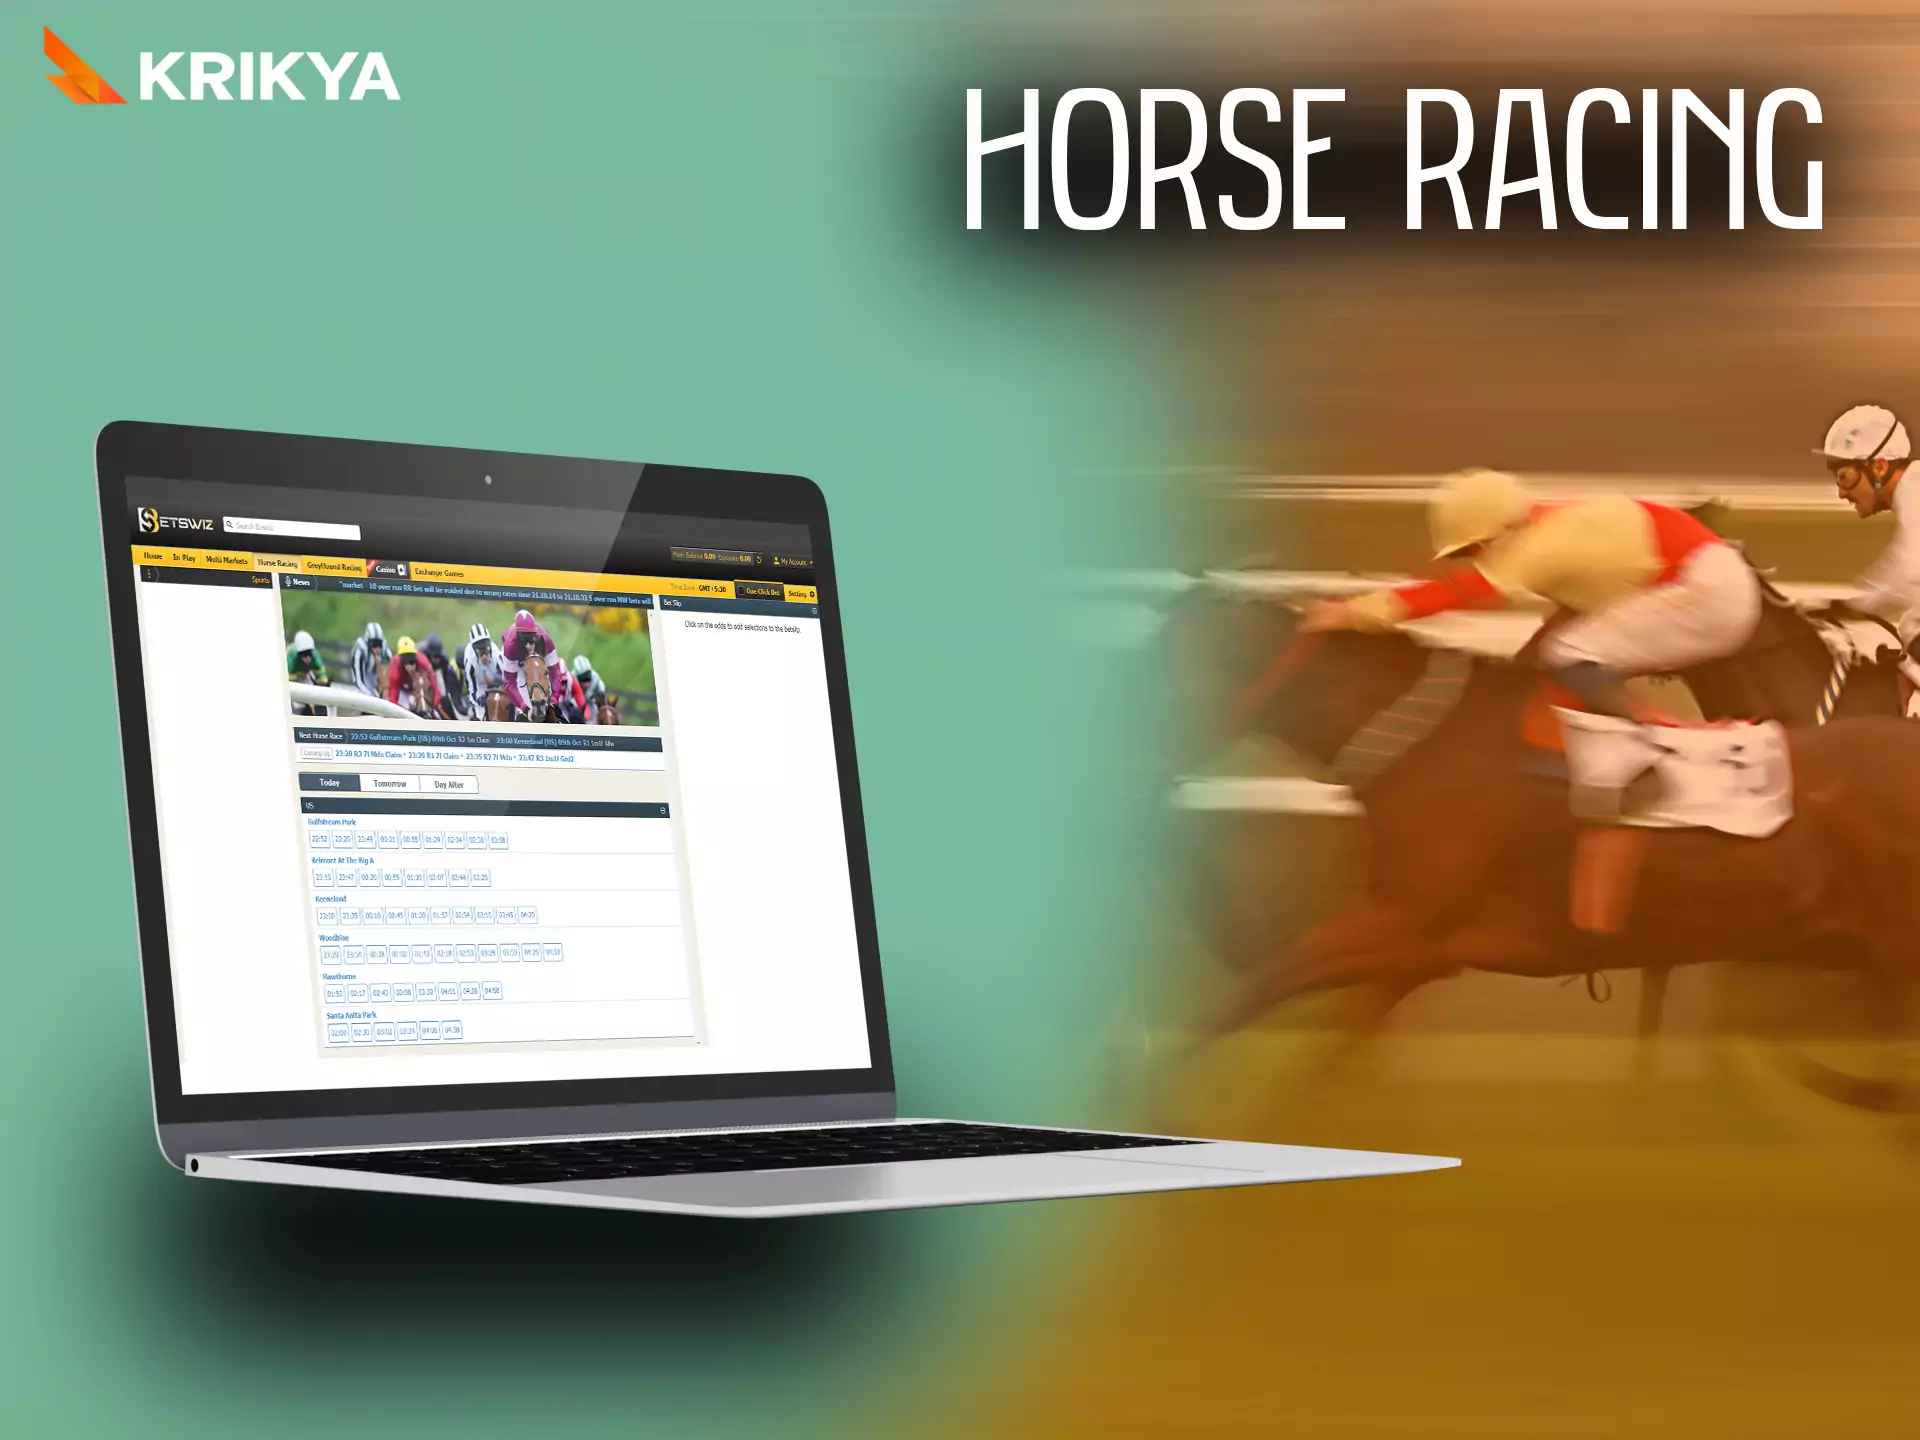 With Krikya, place bets on horse racing.